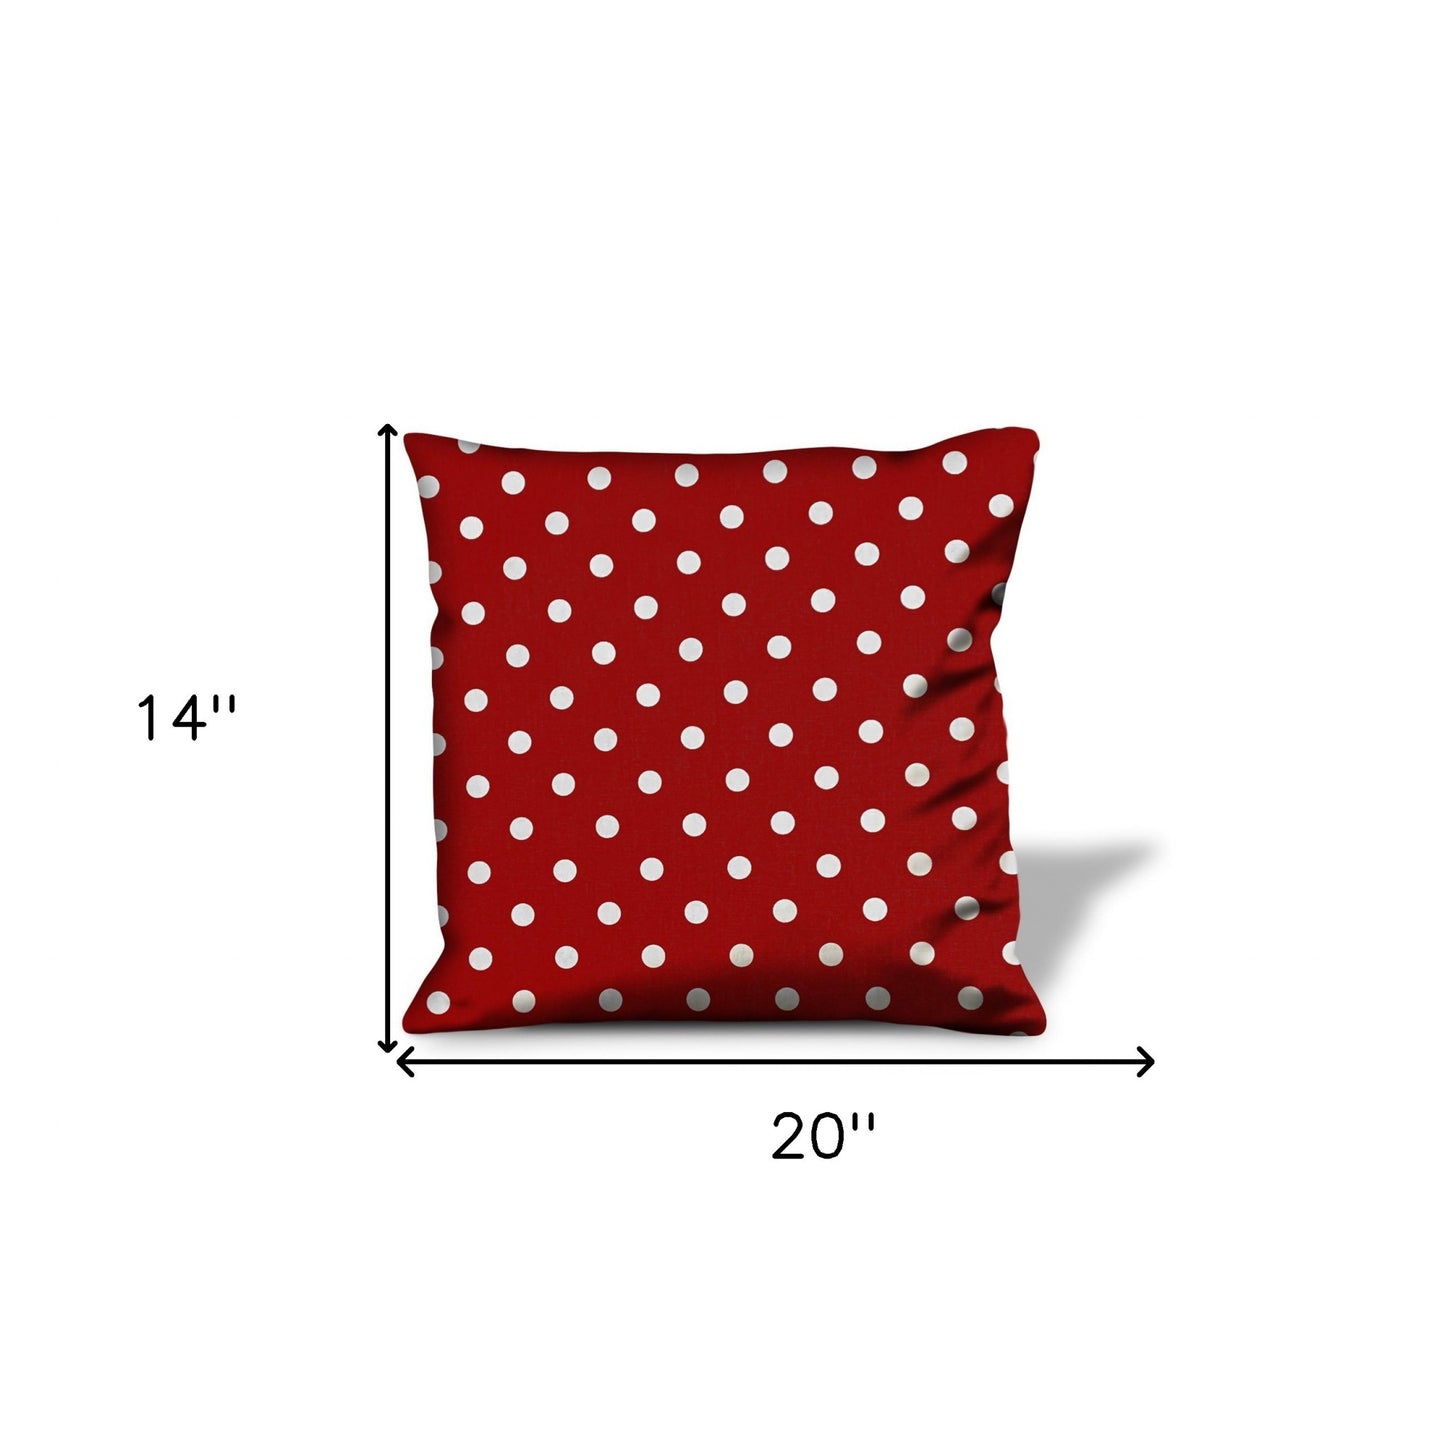 14" X 20" Red And White Zippered 100% Cotton Polka Dots Lumbar Pillow Cover